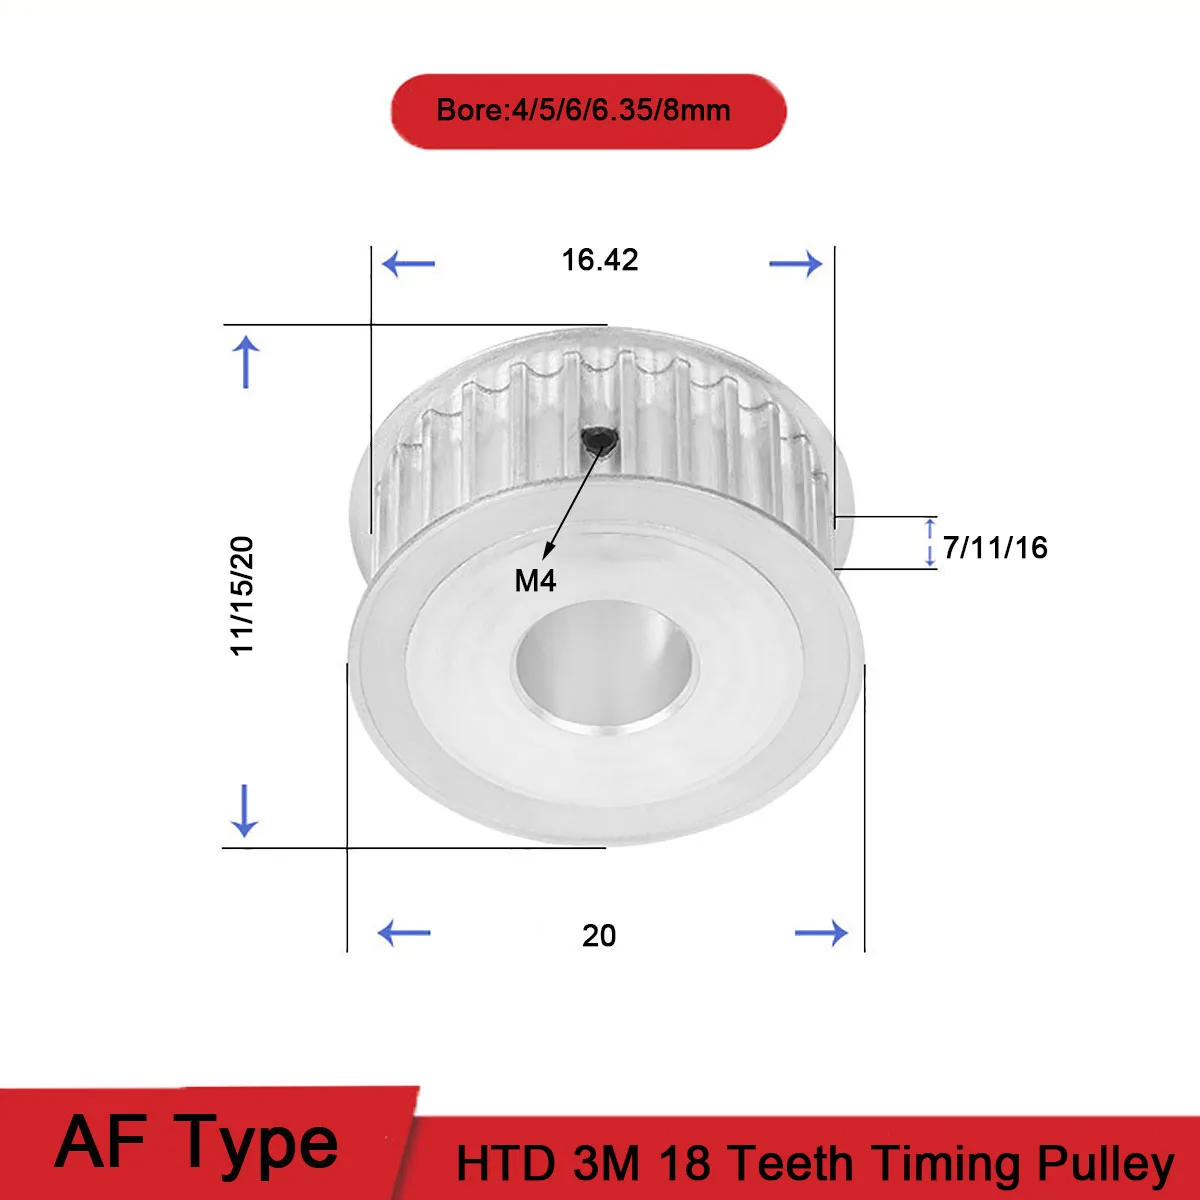 

HTD 3M 18T Timing Pulley Bore 4/5/6/6.35/8mm Gear Pulley 3mm Pitch Teeth Width 7/11/16mm Aluminum Synchronous Timing Belt Pulley